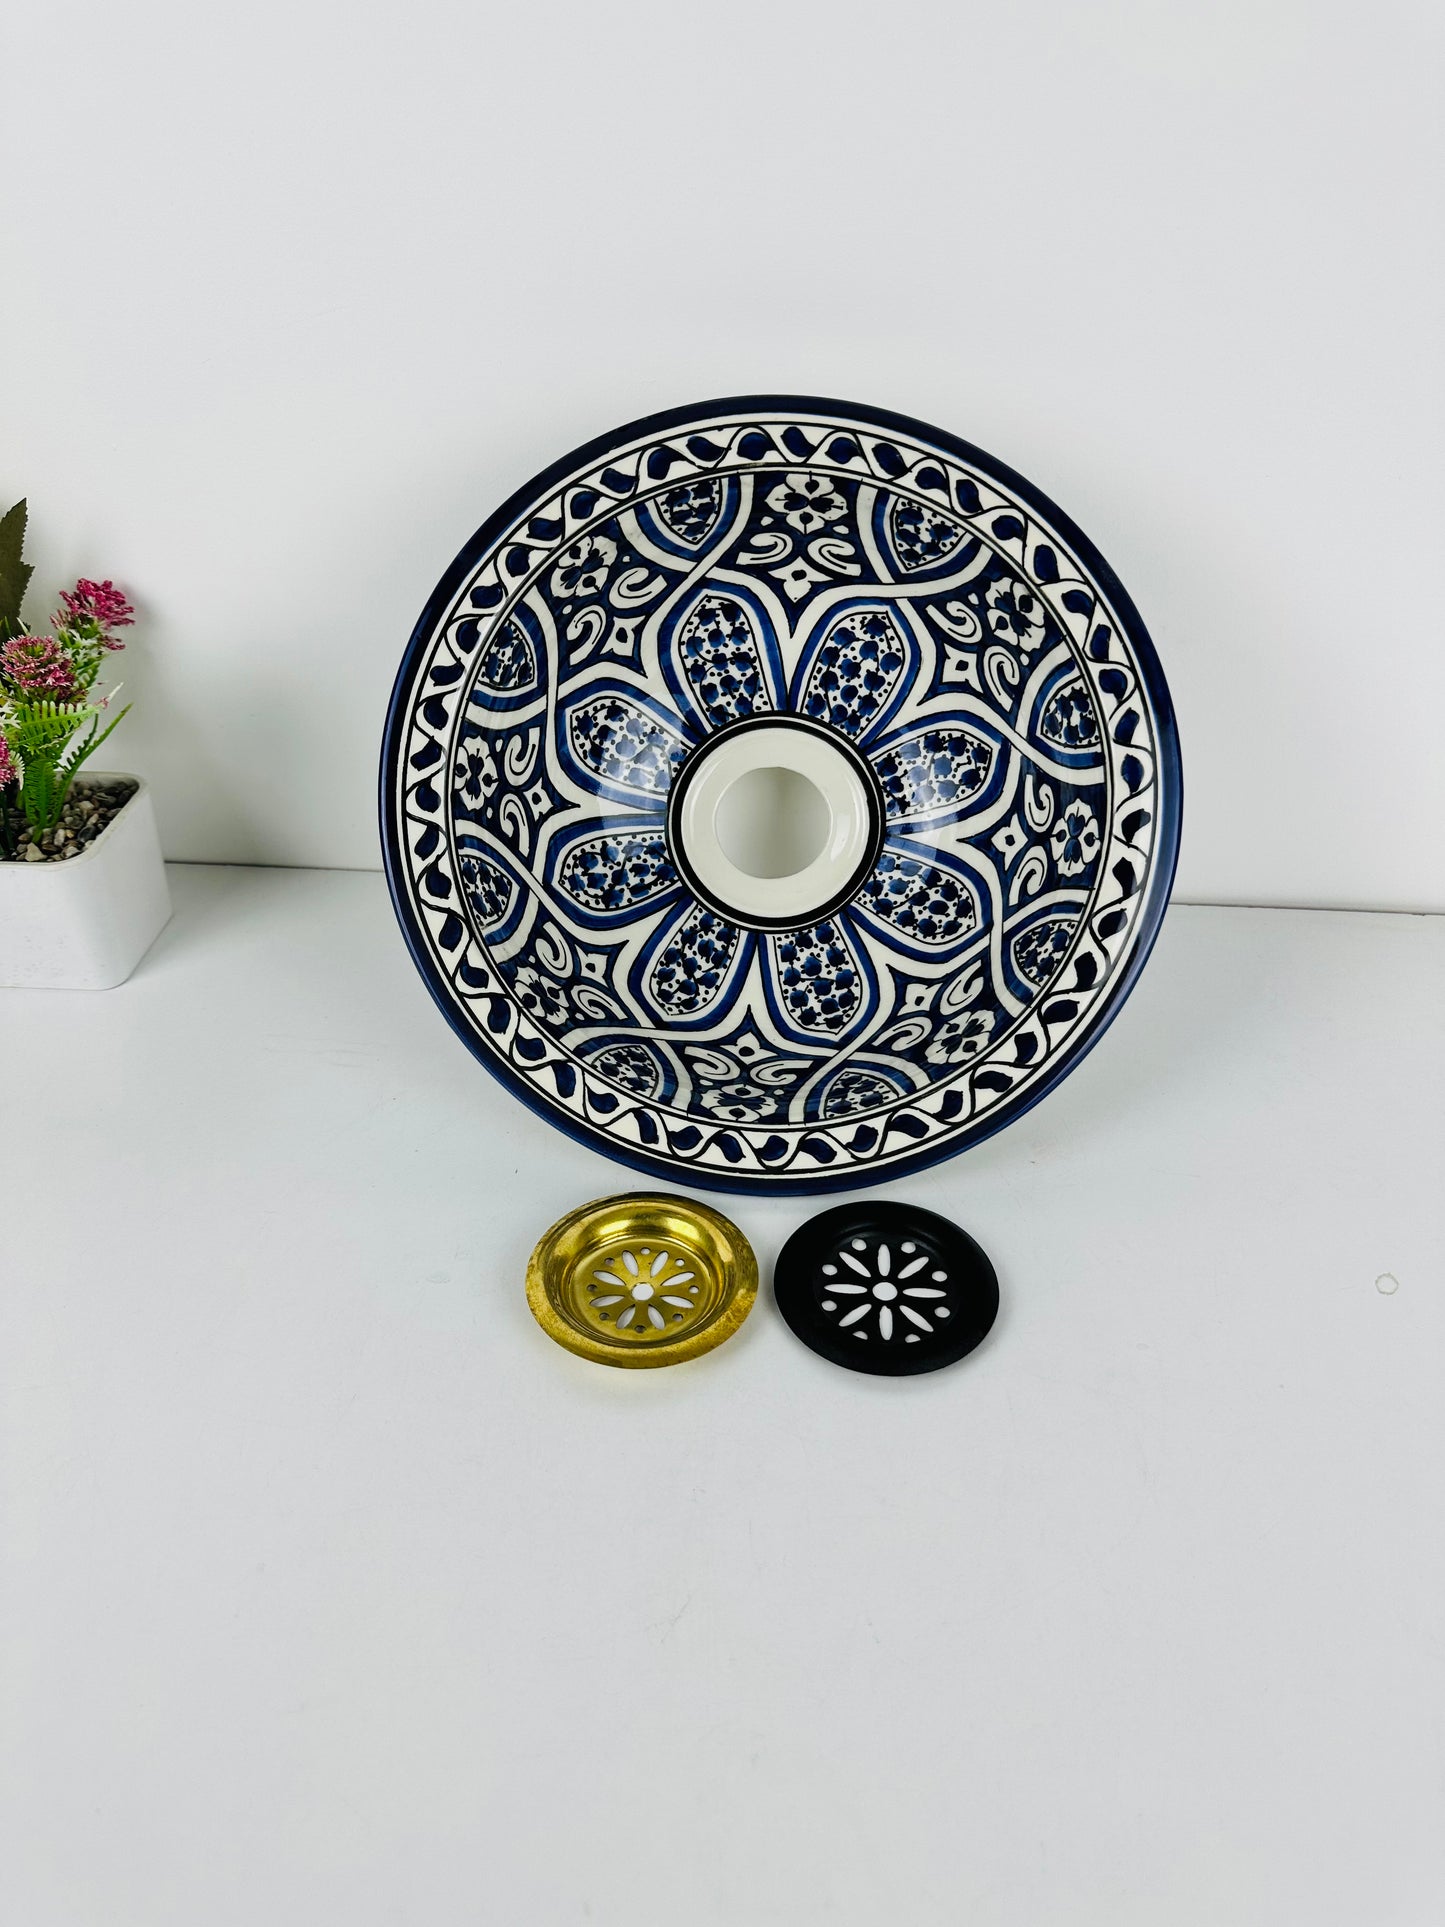 Blooming Blue: Handcrafted Ceramic Sink with Floral Design in Blue